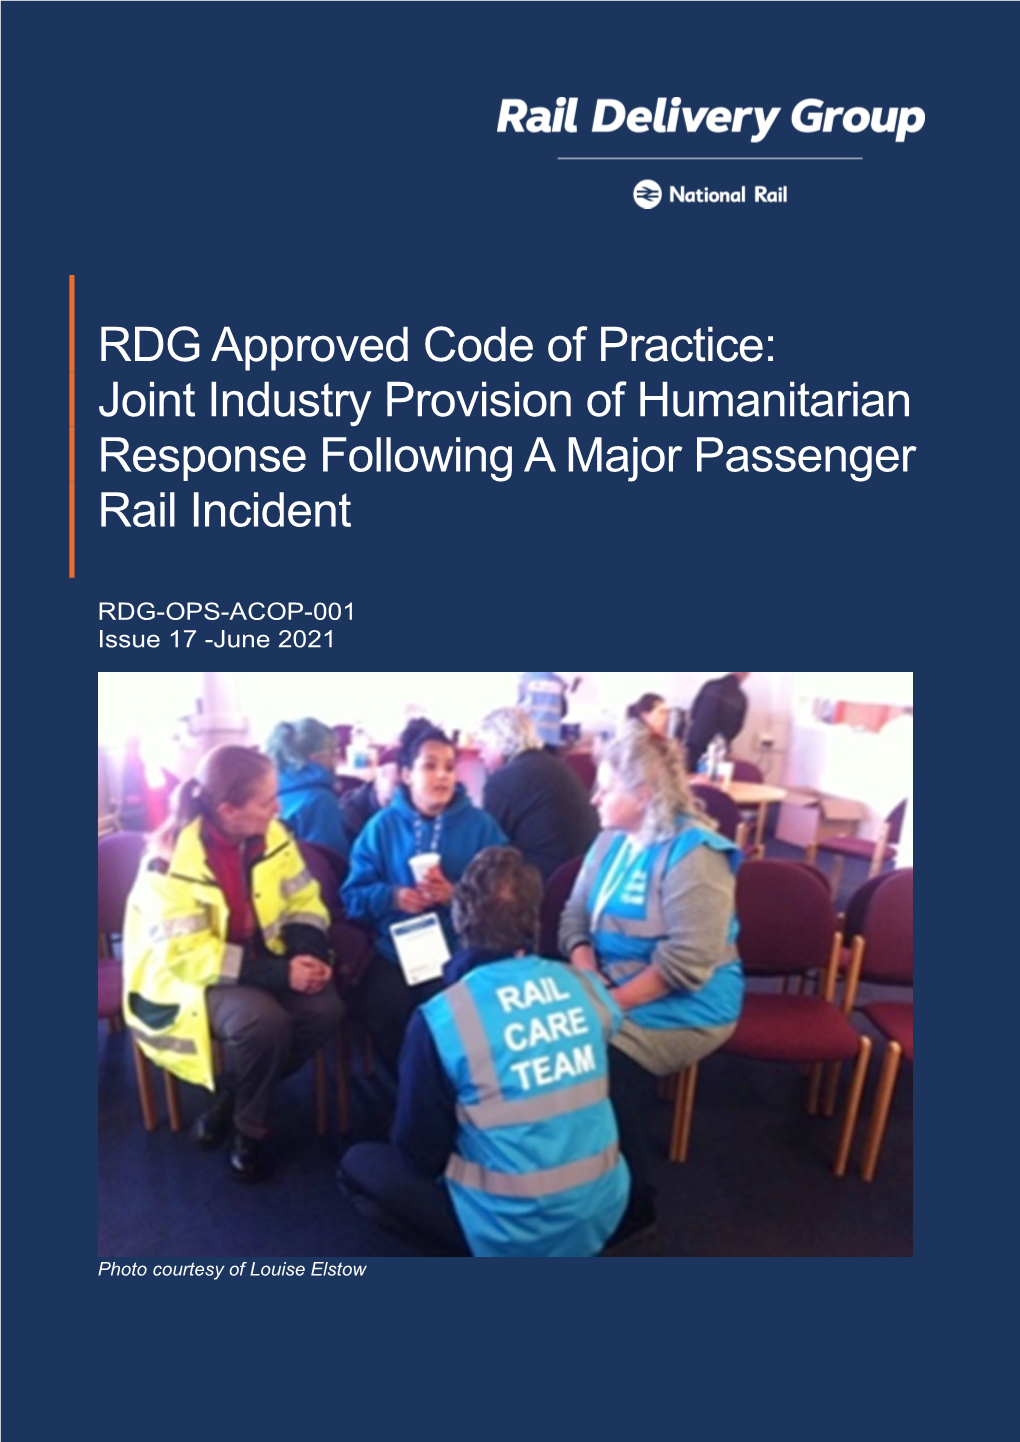 Joint Industry Provision of Humanitarian Response Following a Major Passenger Rail Incident